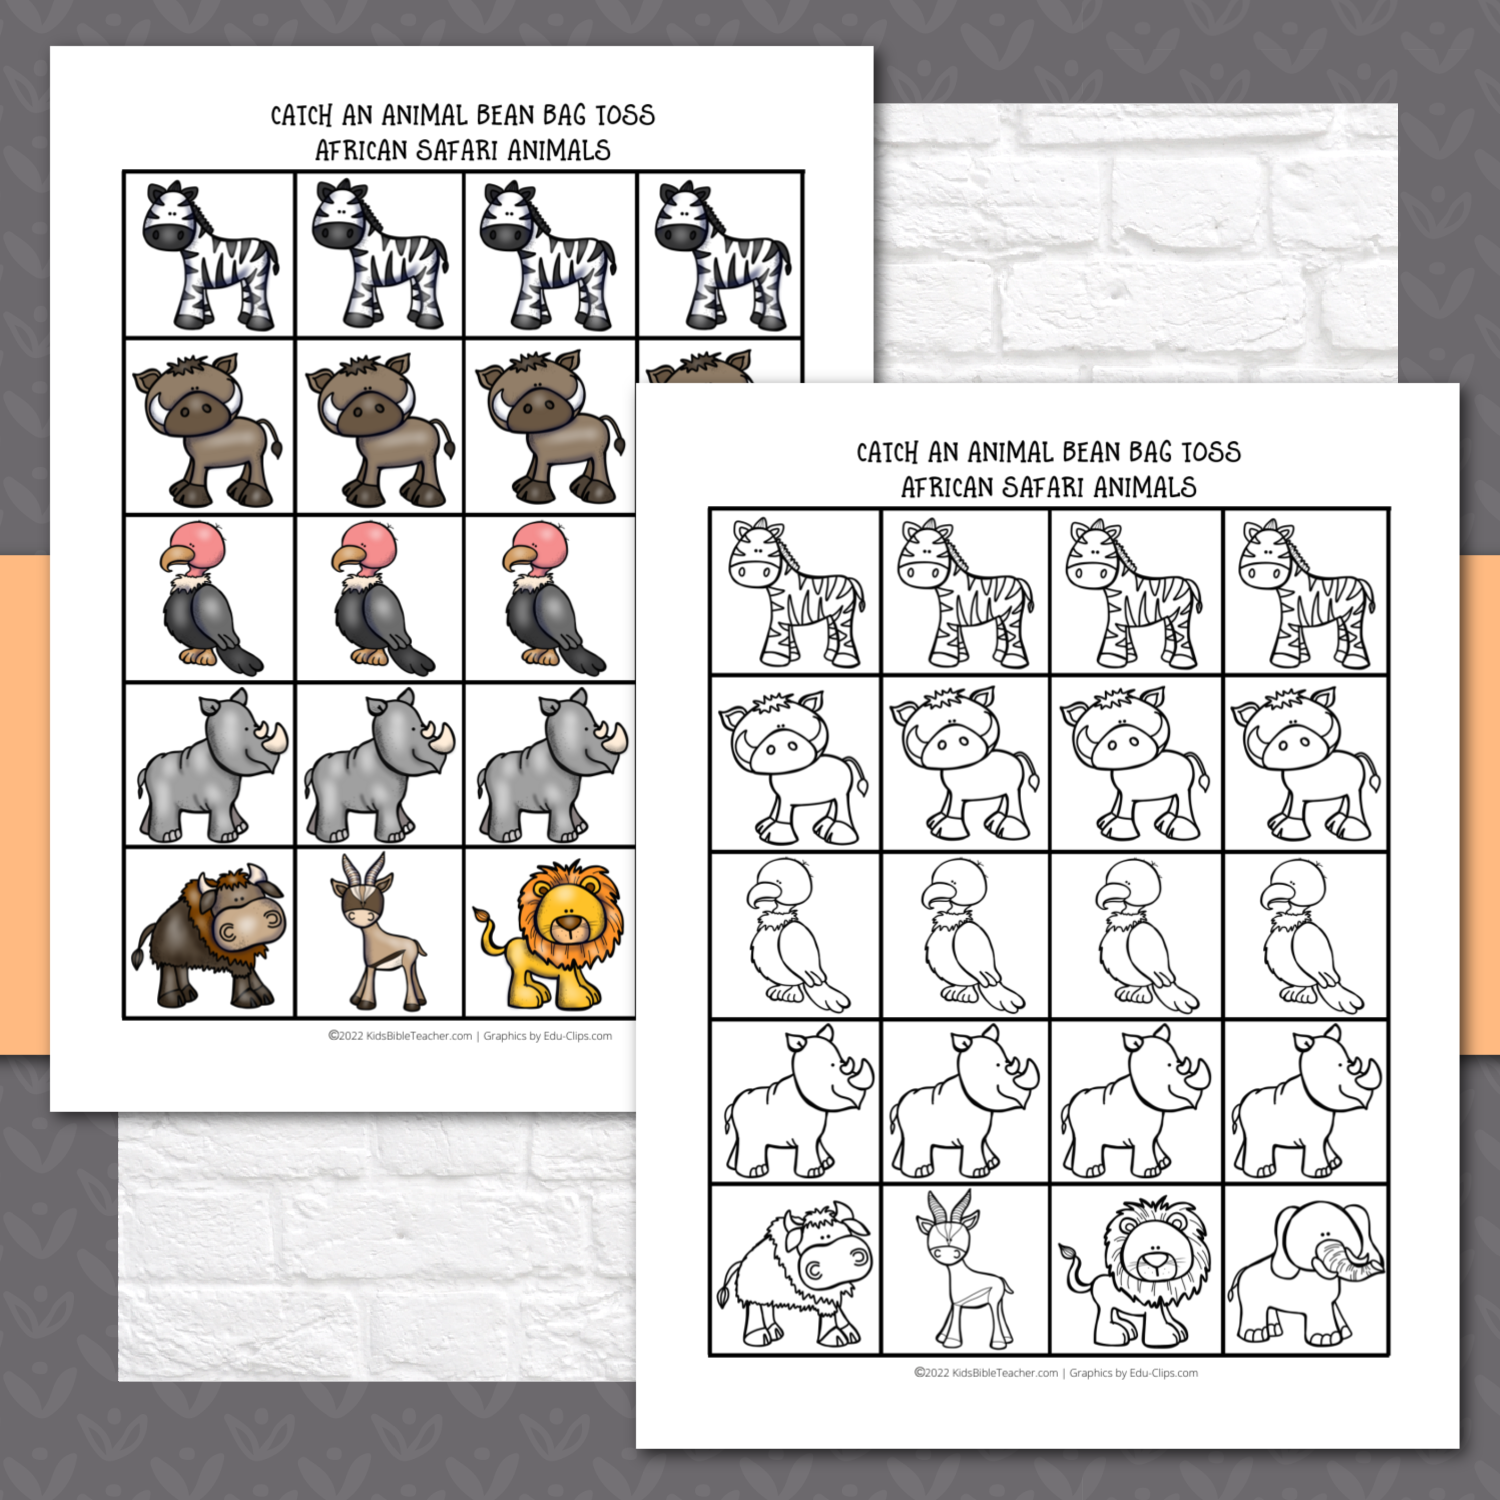 Lesson Review Game - Catch an Animal - SAFARI ANIMALS Edition